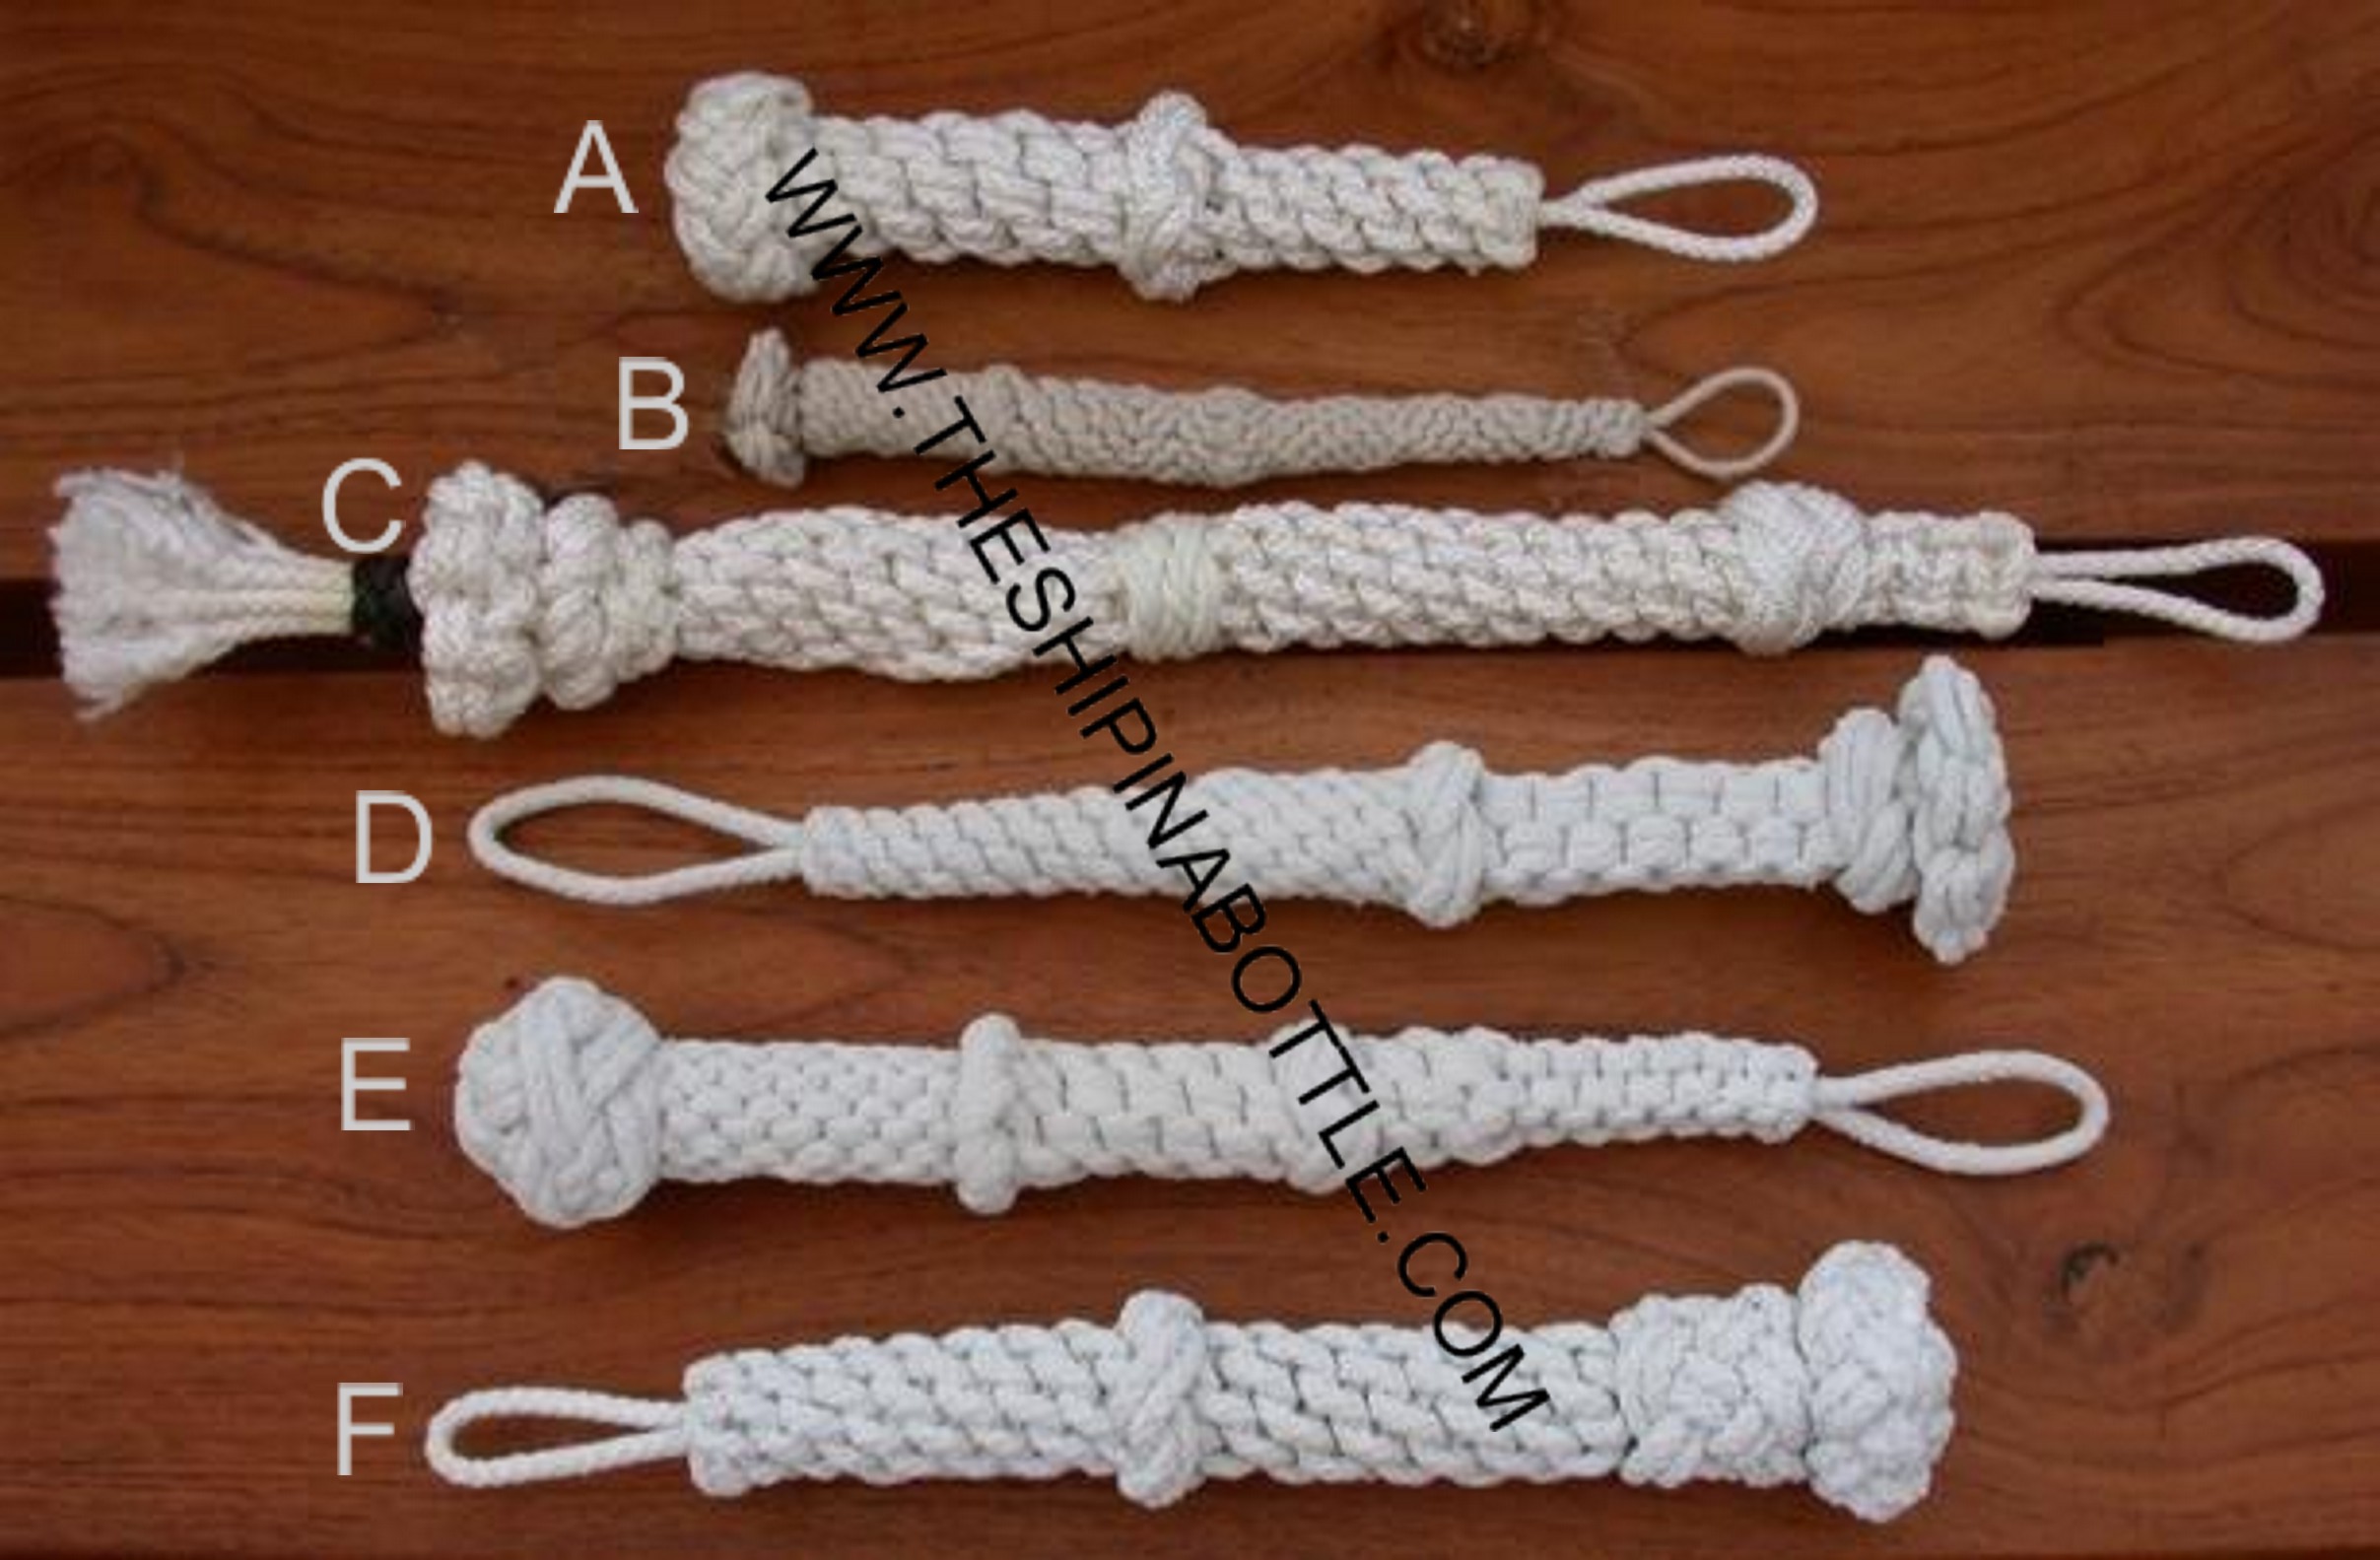 http://www.theshipinabottle.com/images/Bell_Rope_Samples.jpg